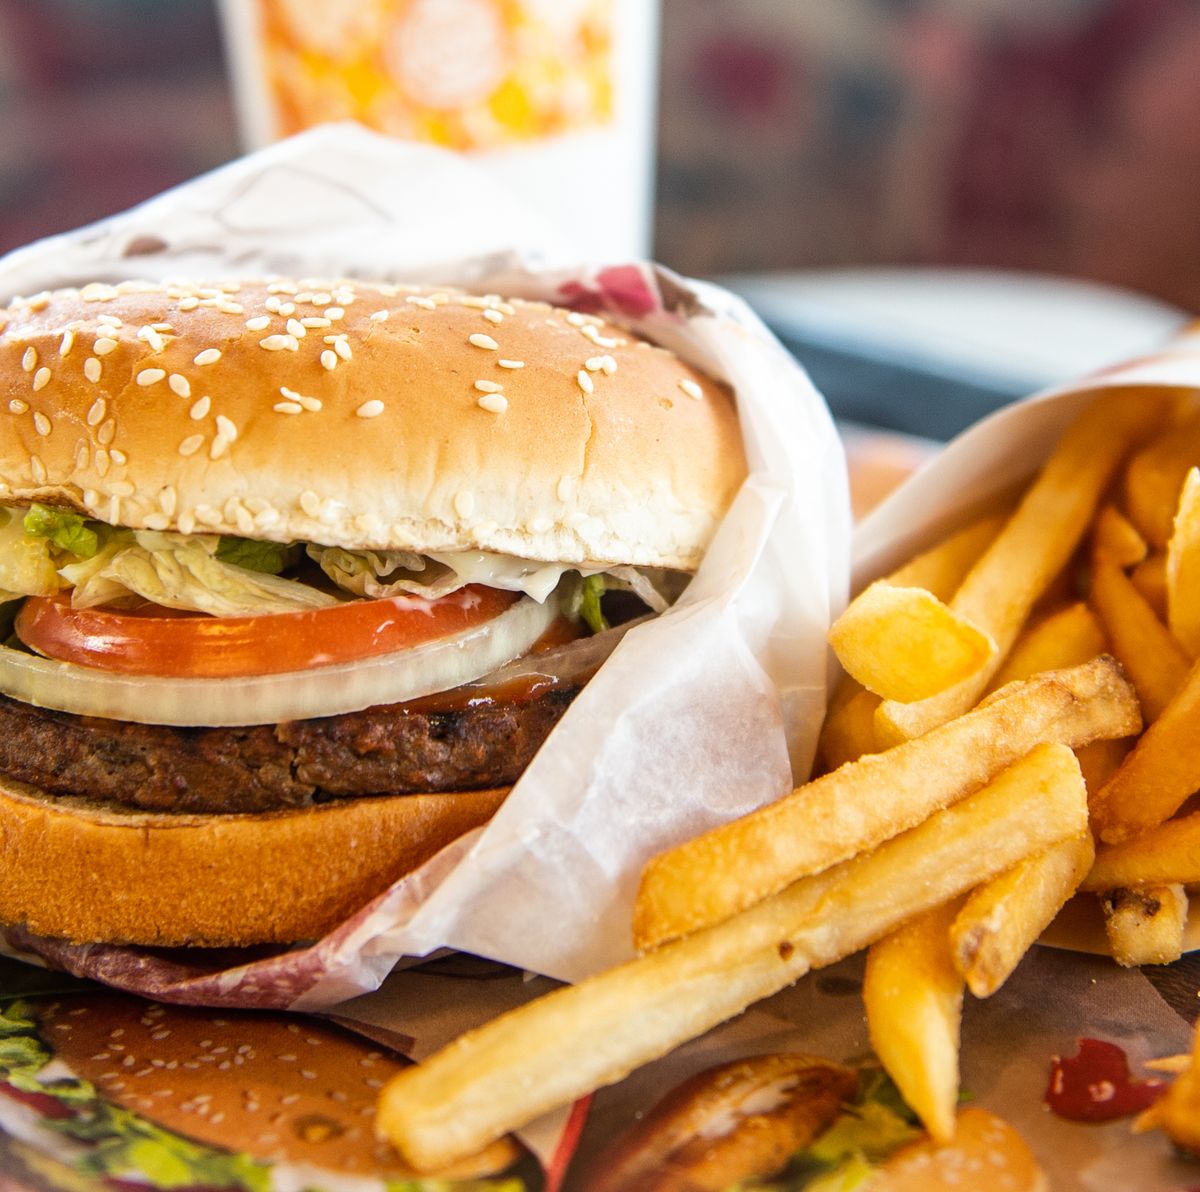 Is Burger King's Impossible Whopper Healthy? Nutrition & Calories